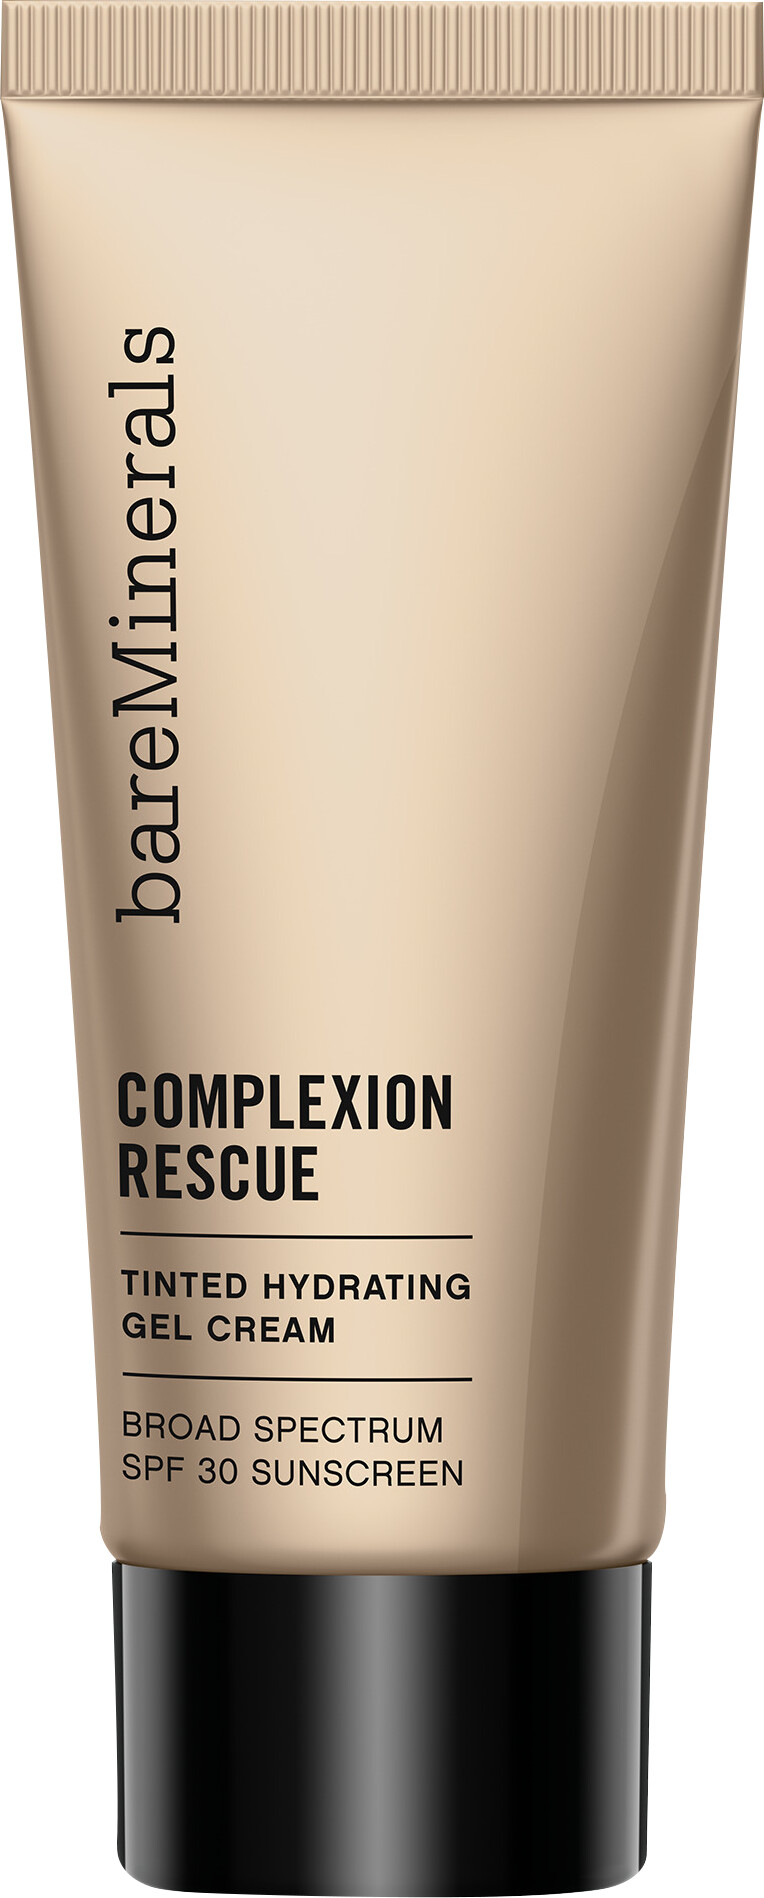 bareMinerals Complexion Rescue Tinted Hydrating Gel Cream SPF30 15ml 01 - Opal